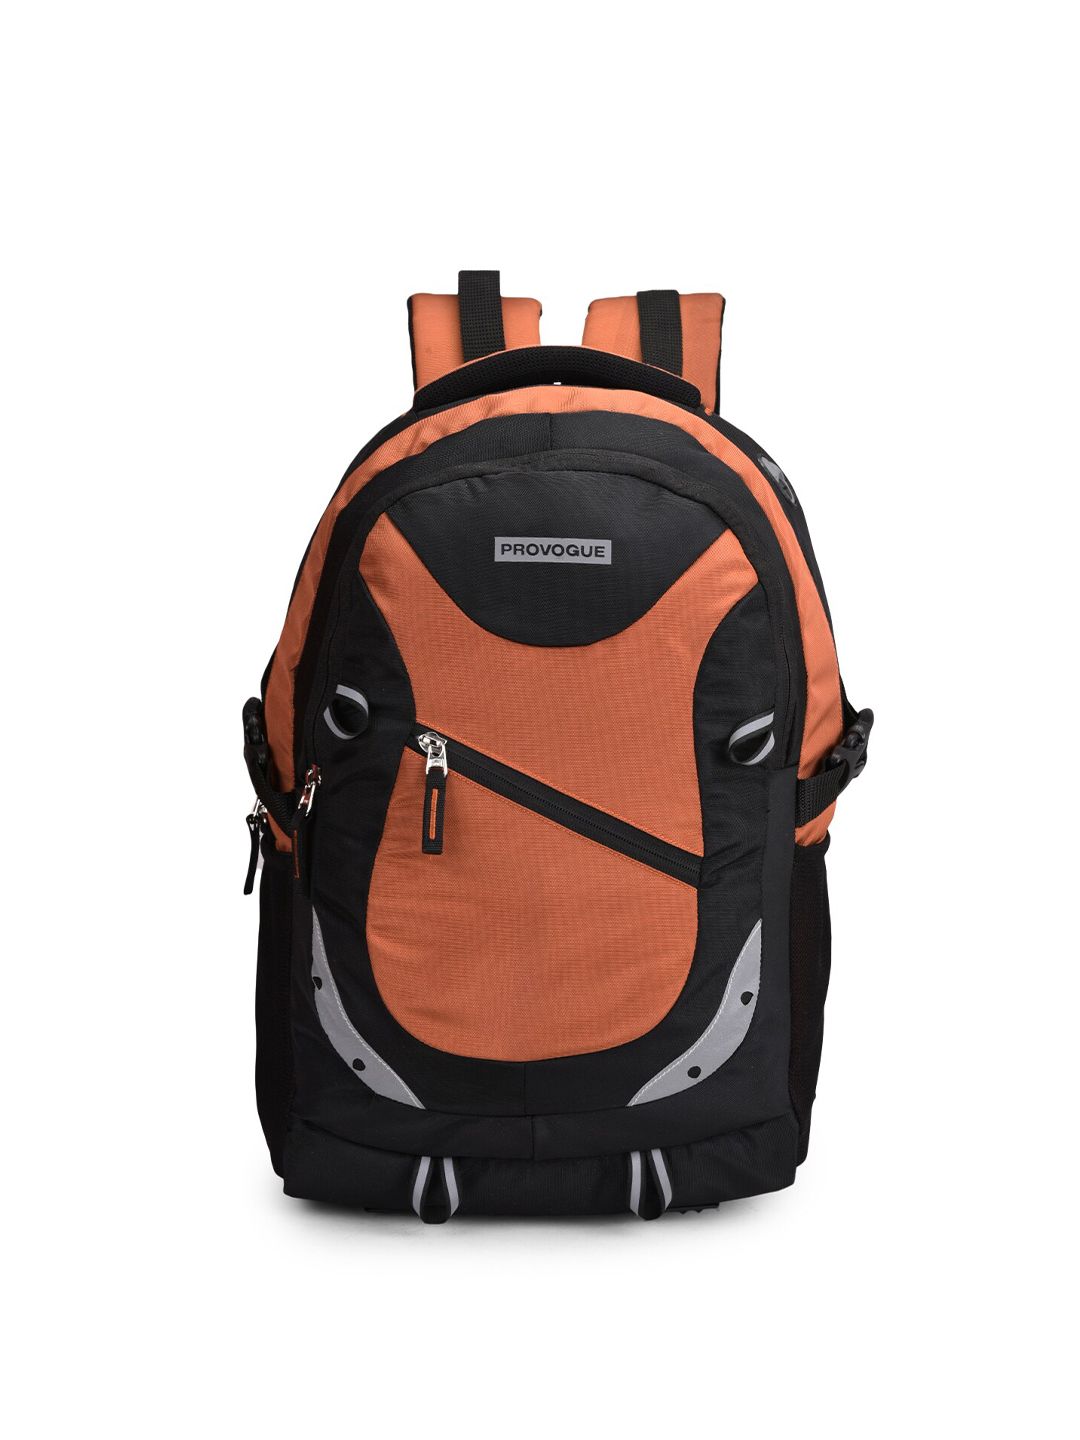 Provogue Unisex Tan Brown & Black Colourblocked Backpack with Reflective Strip Price in India